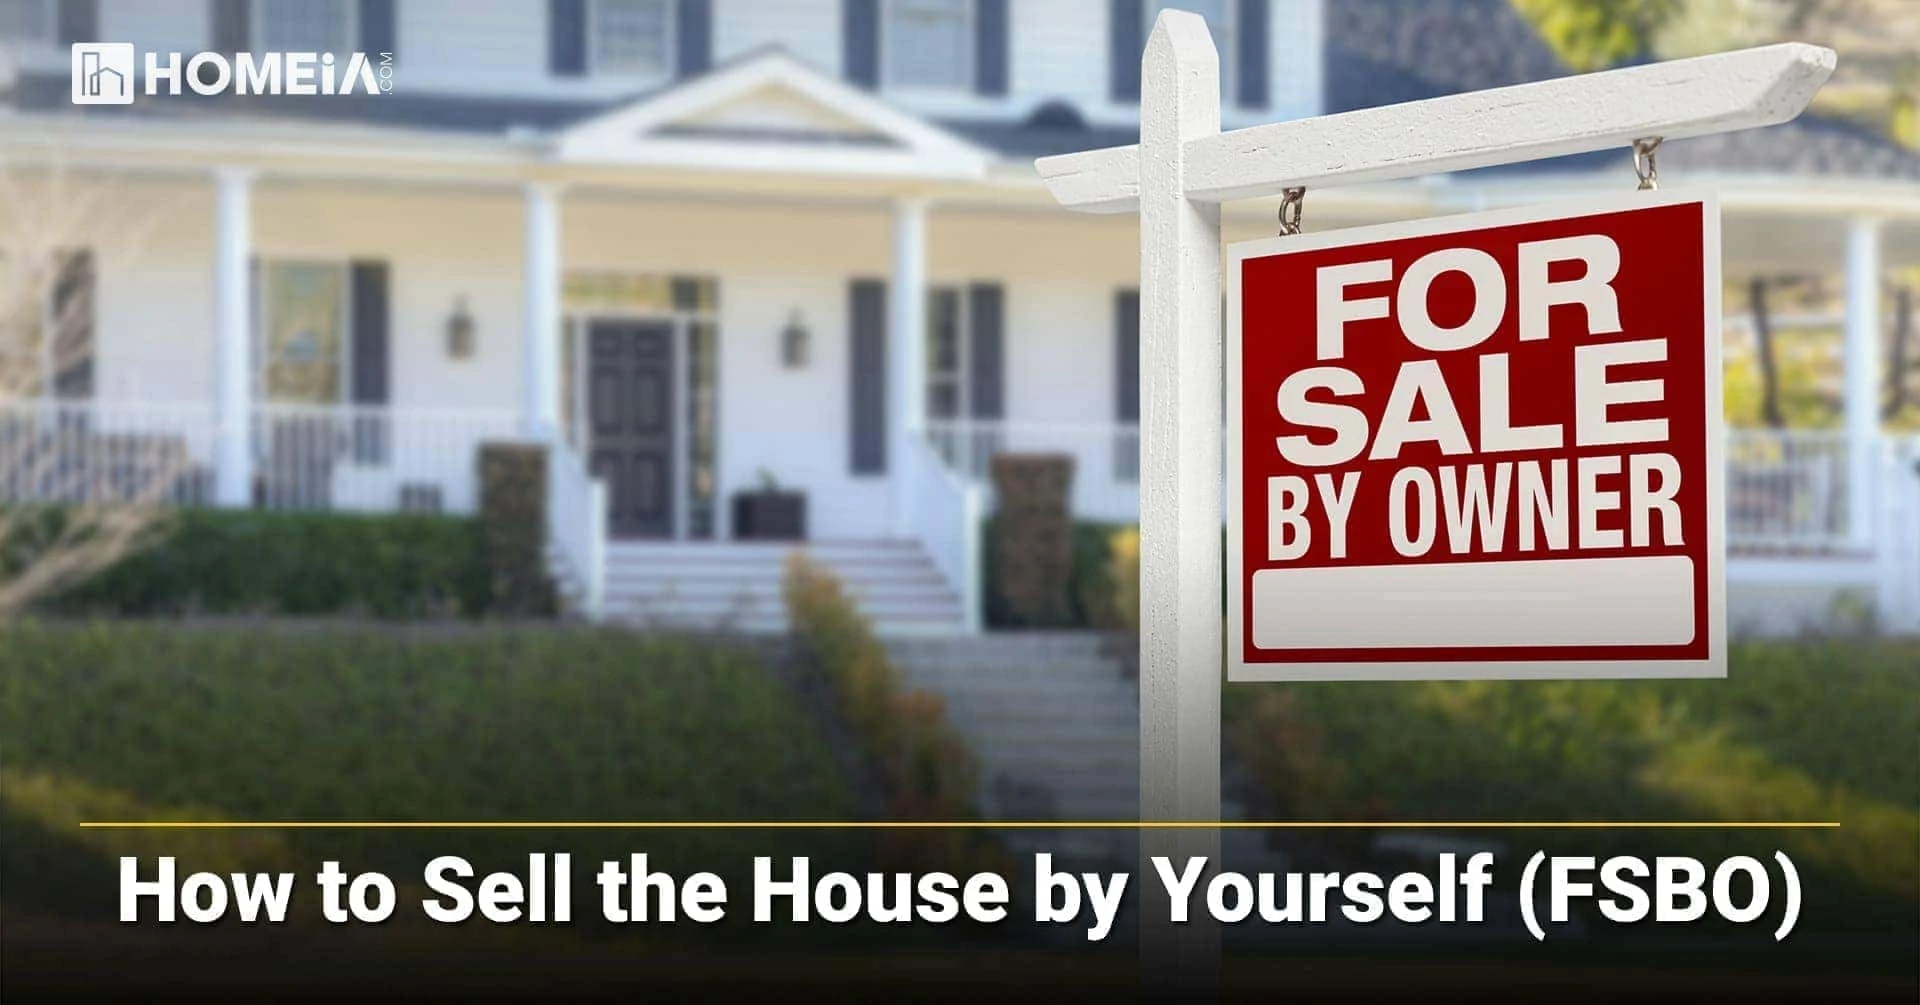 How to Sell the House by Yourself (FSBO)